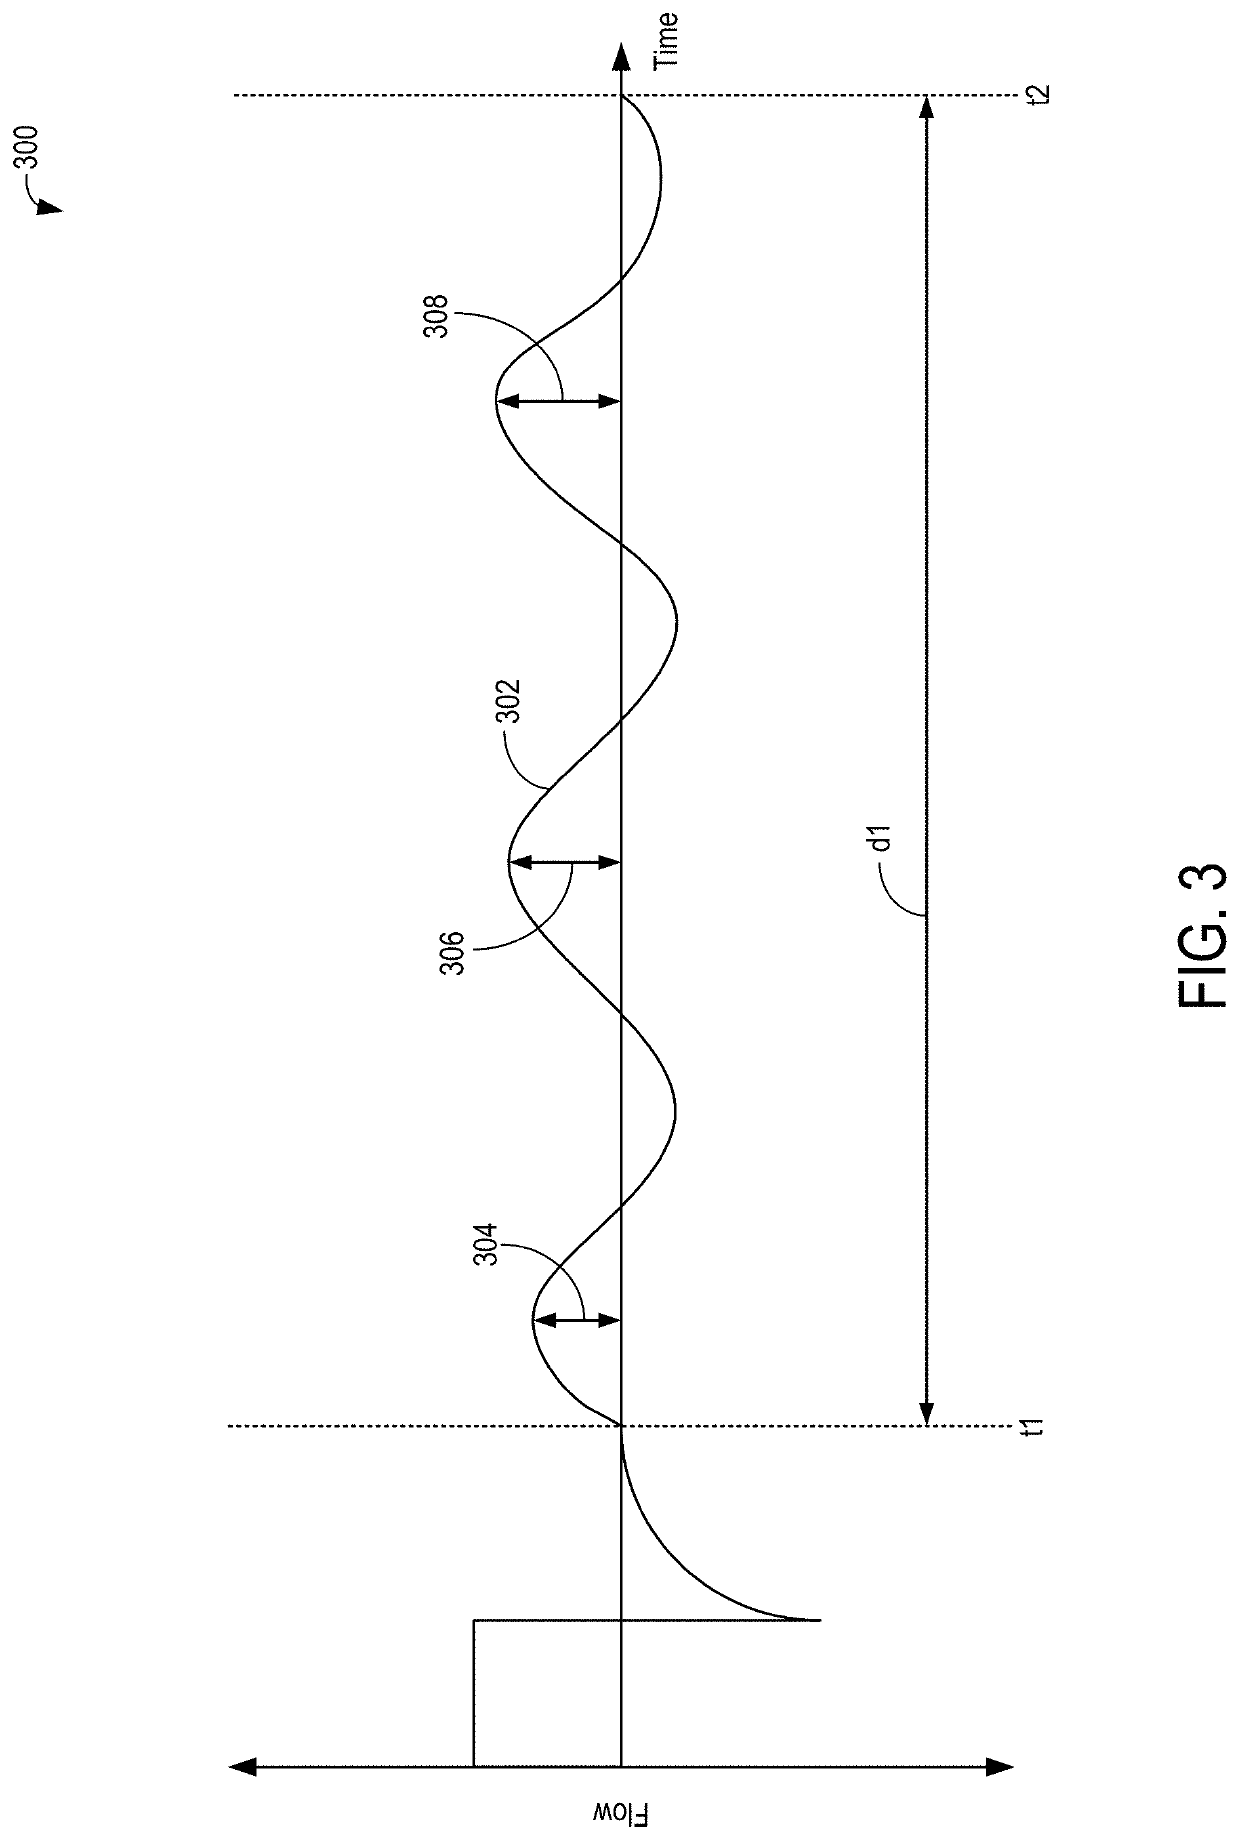 Method and systems for executing nasal high flow therapy with settings determined from flow outputs during a previous ventilation mode